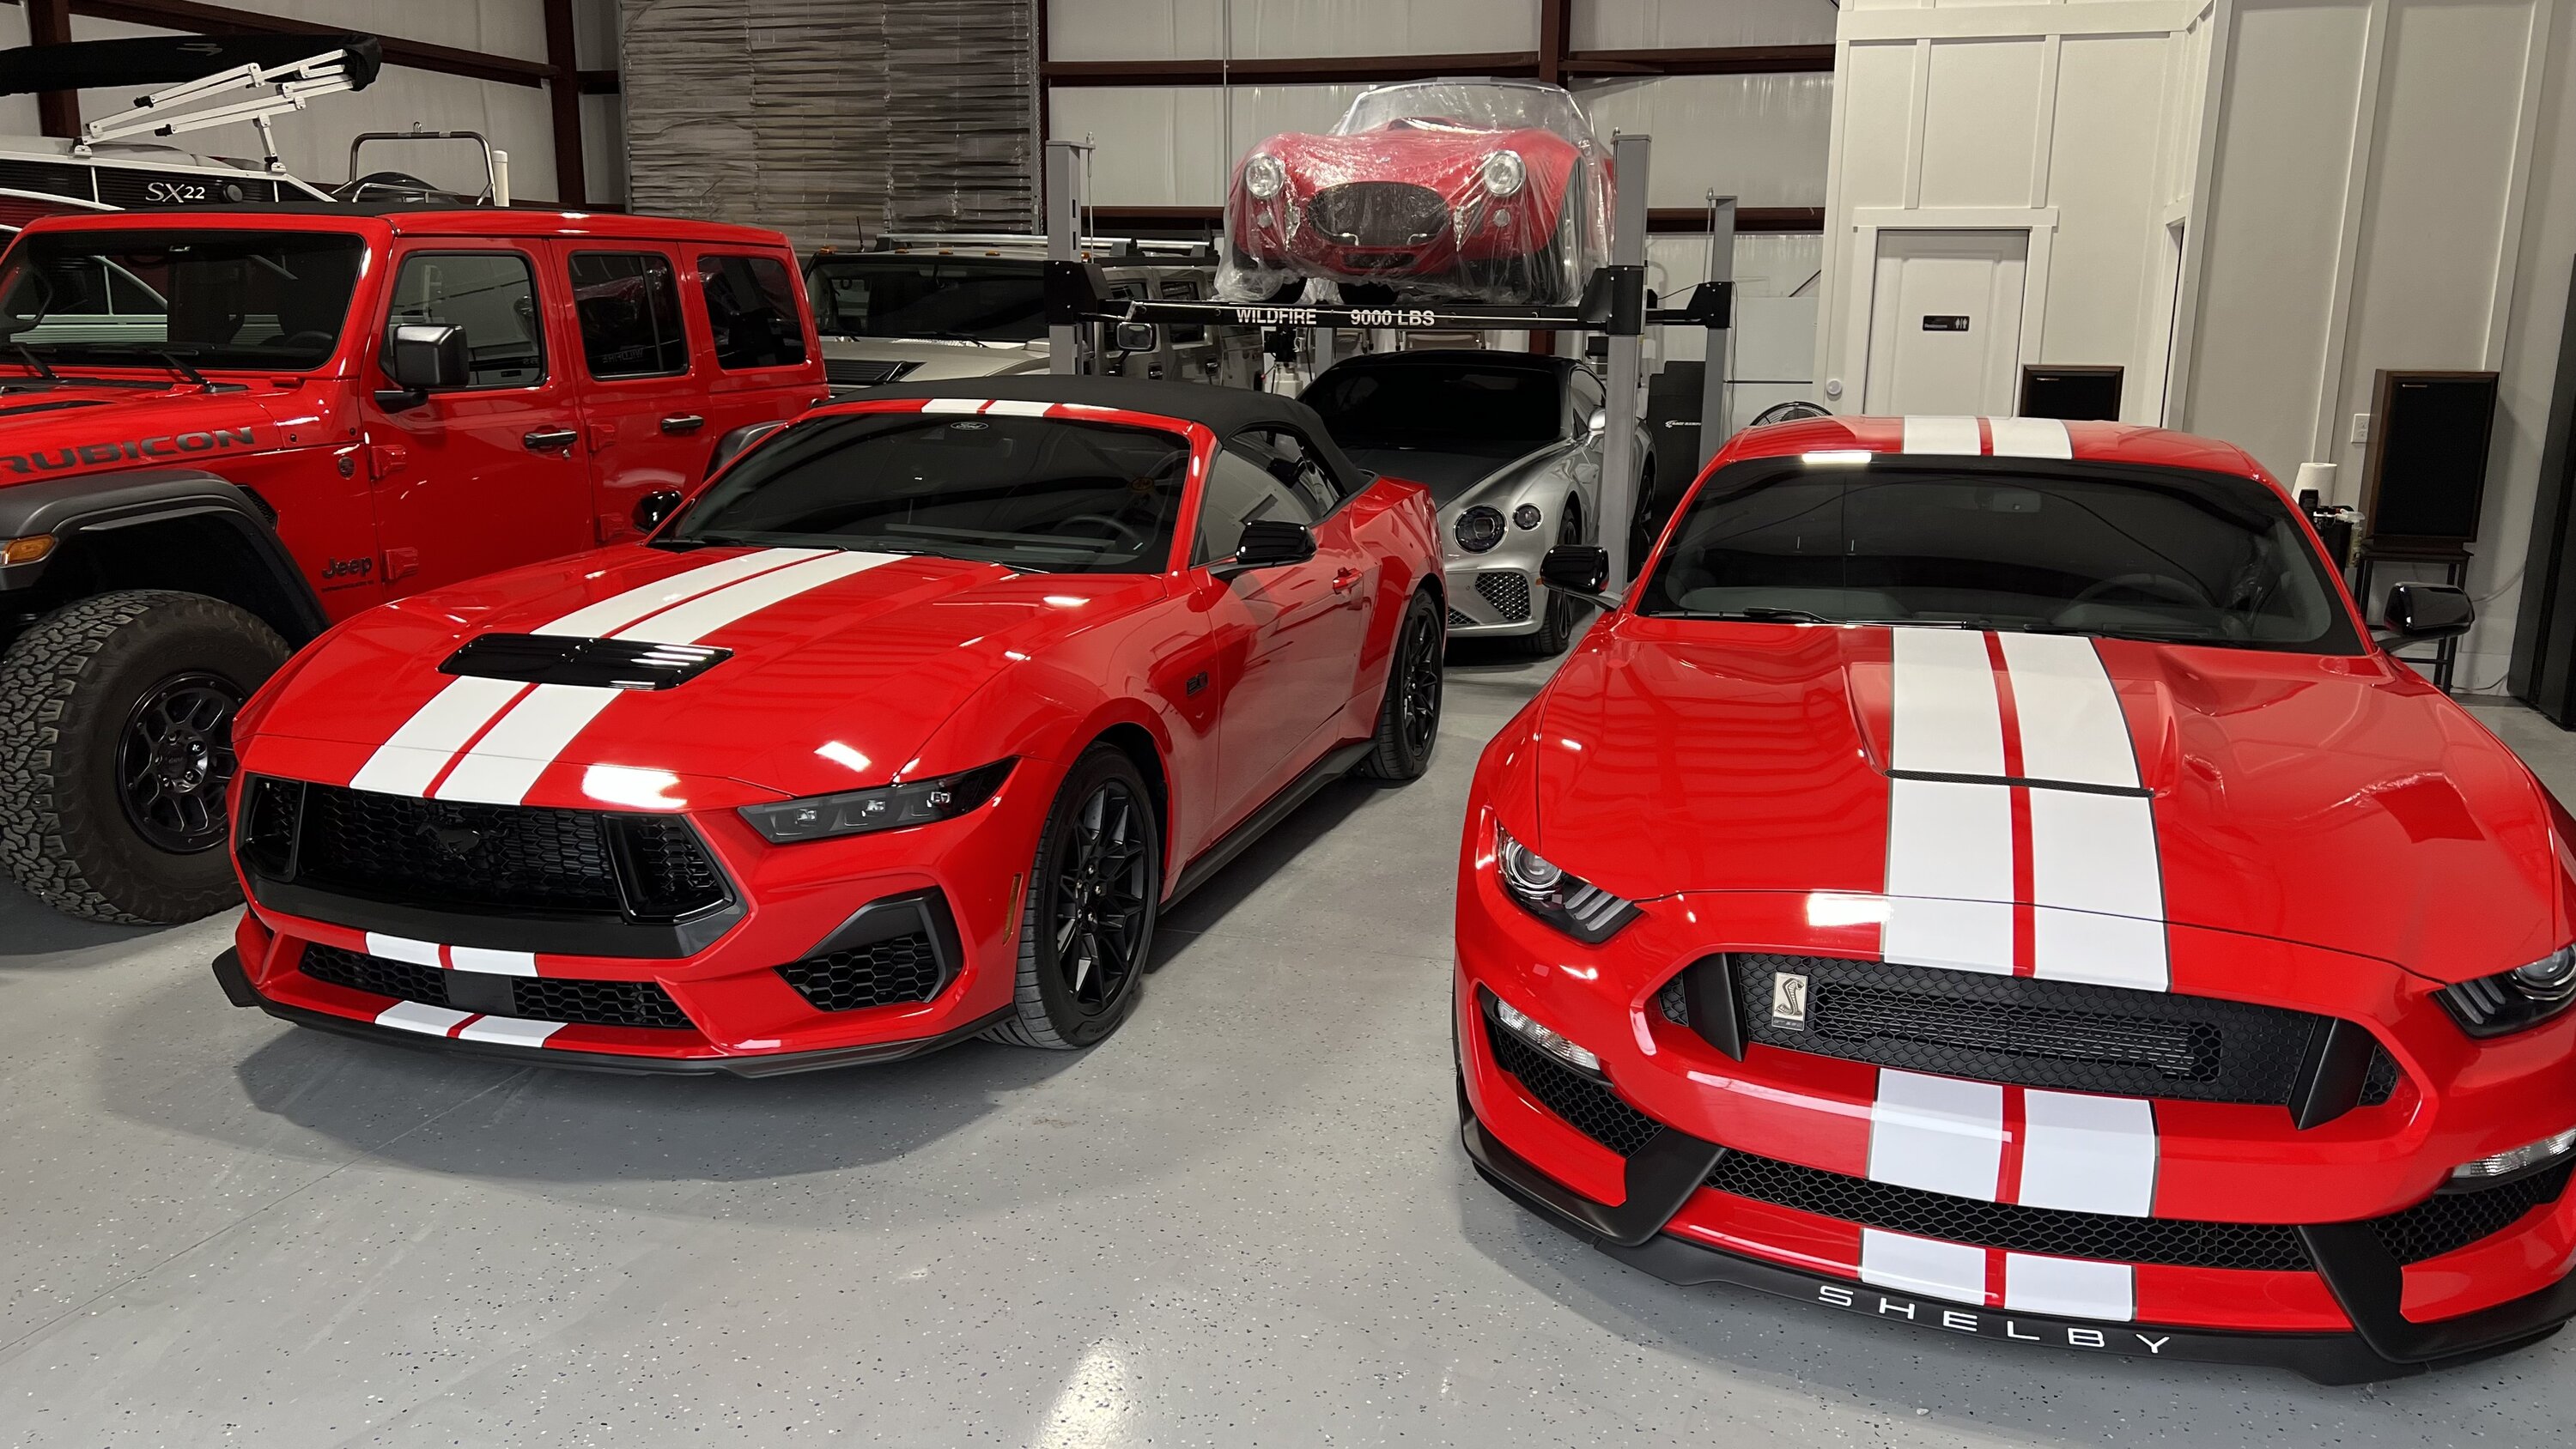 S650 Mustang S650 Red convertible with stripes next to GT350 IMG_9428